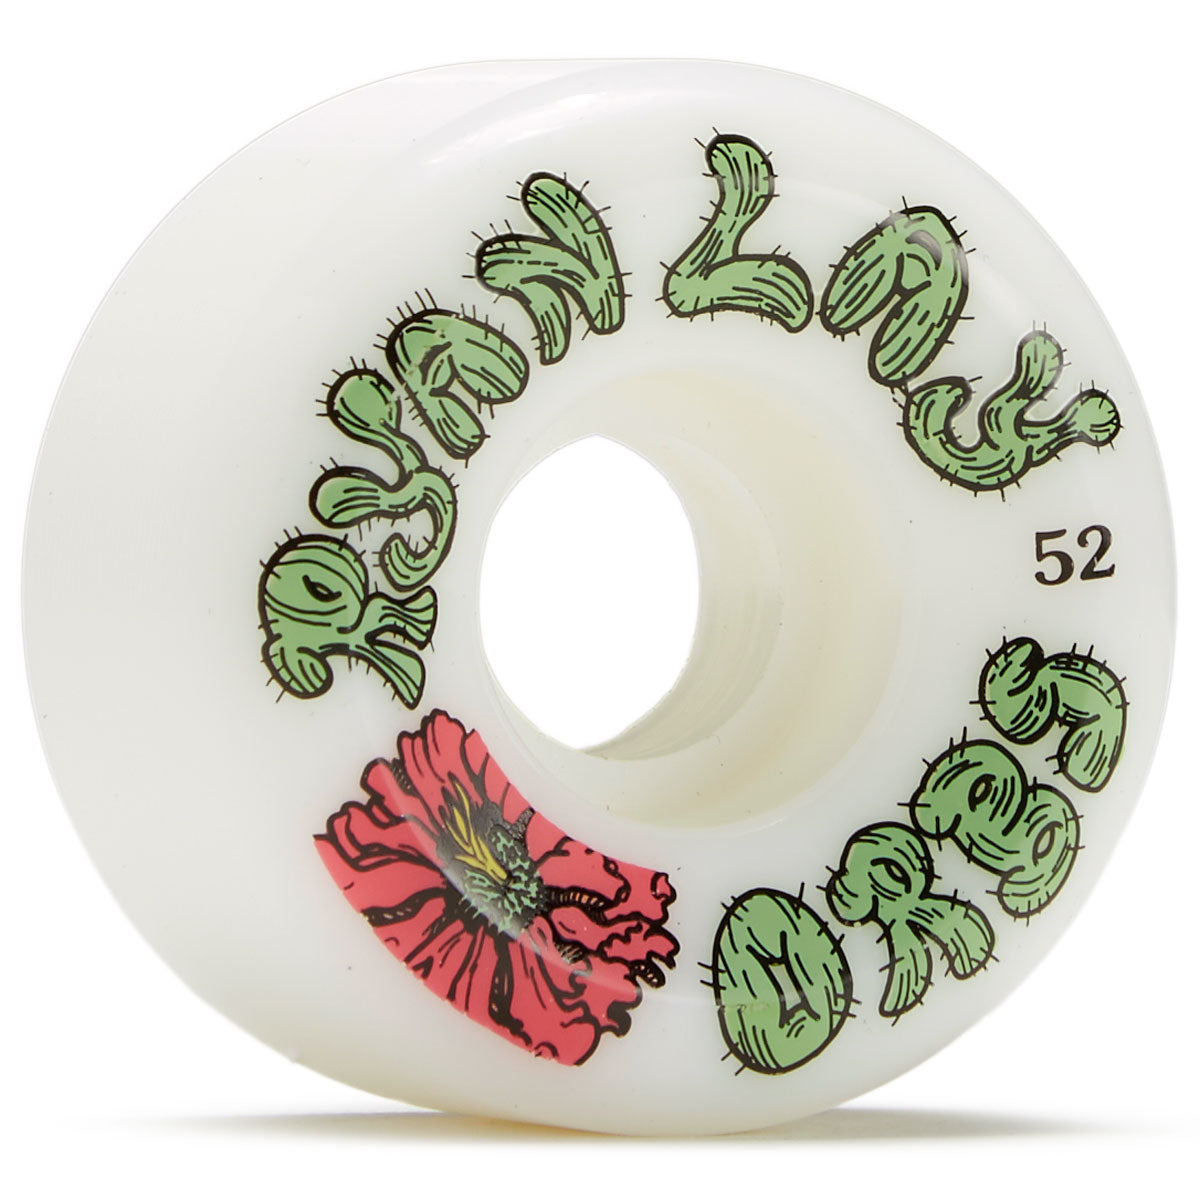 Welcome Orbs Specters Conical 99A Lay Skateboard Wheels - White - 52mm image 1